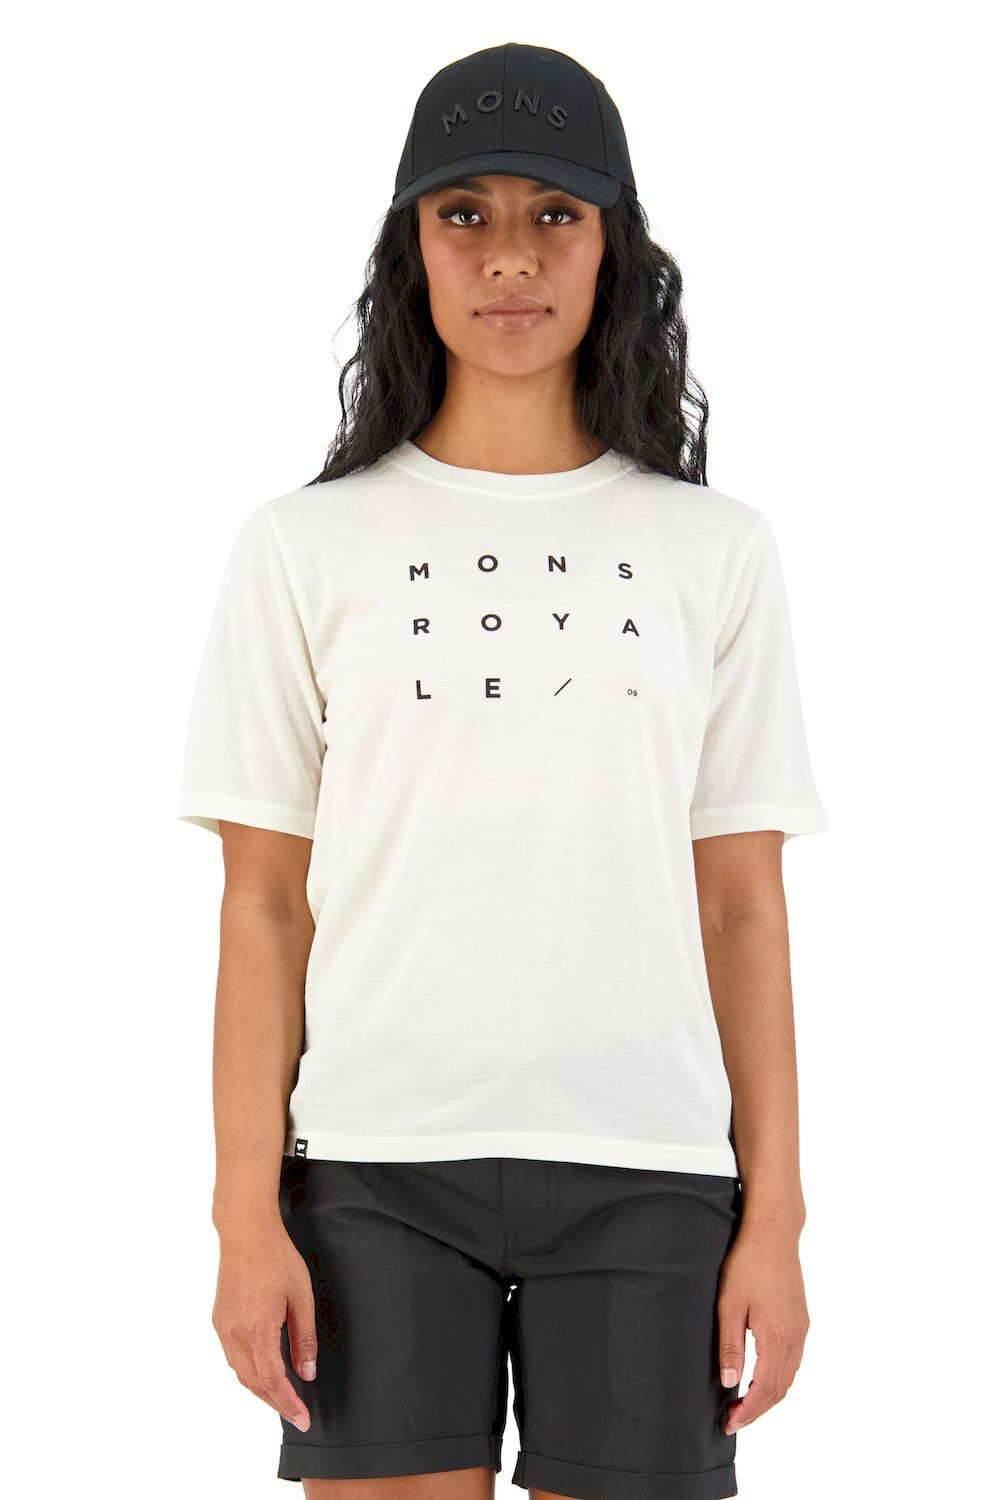 Mons Royale Icon Relaxed Tee - MTB jersey - Women's